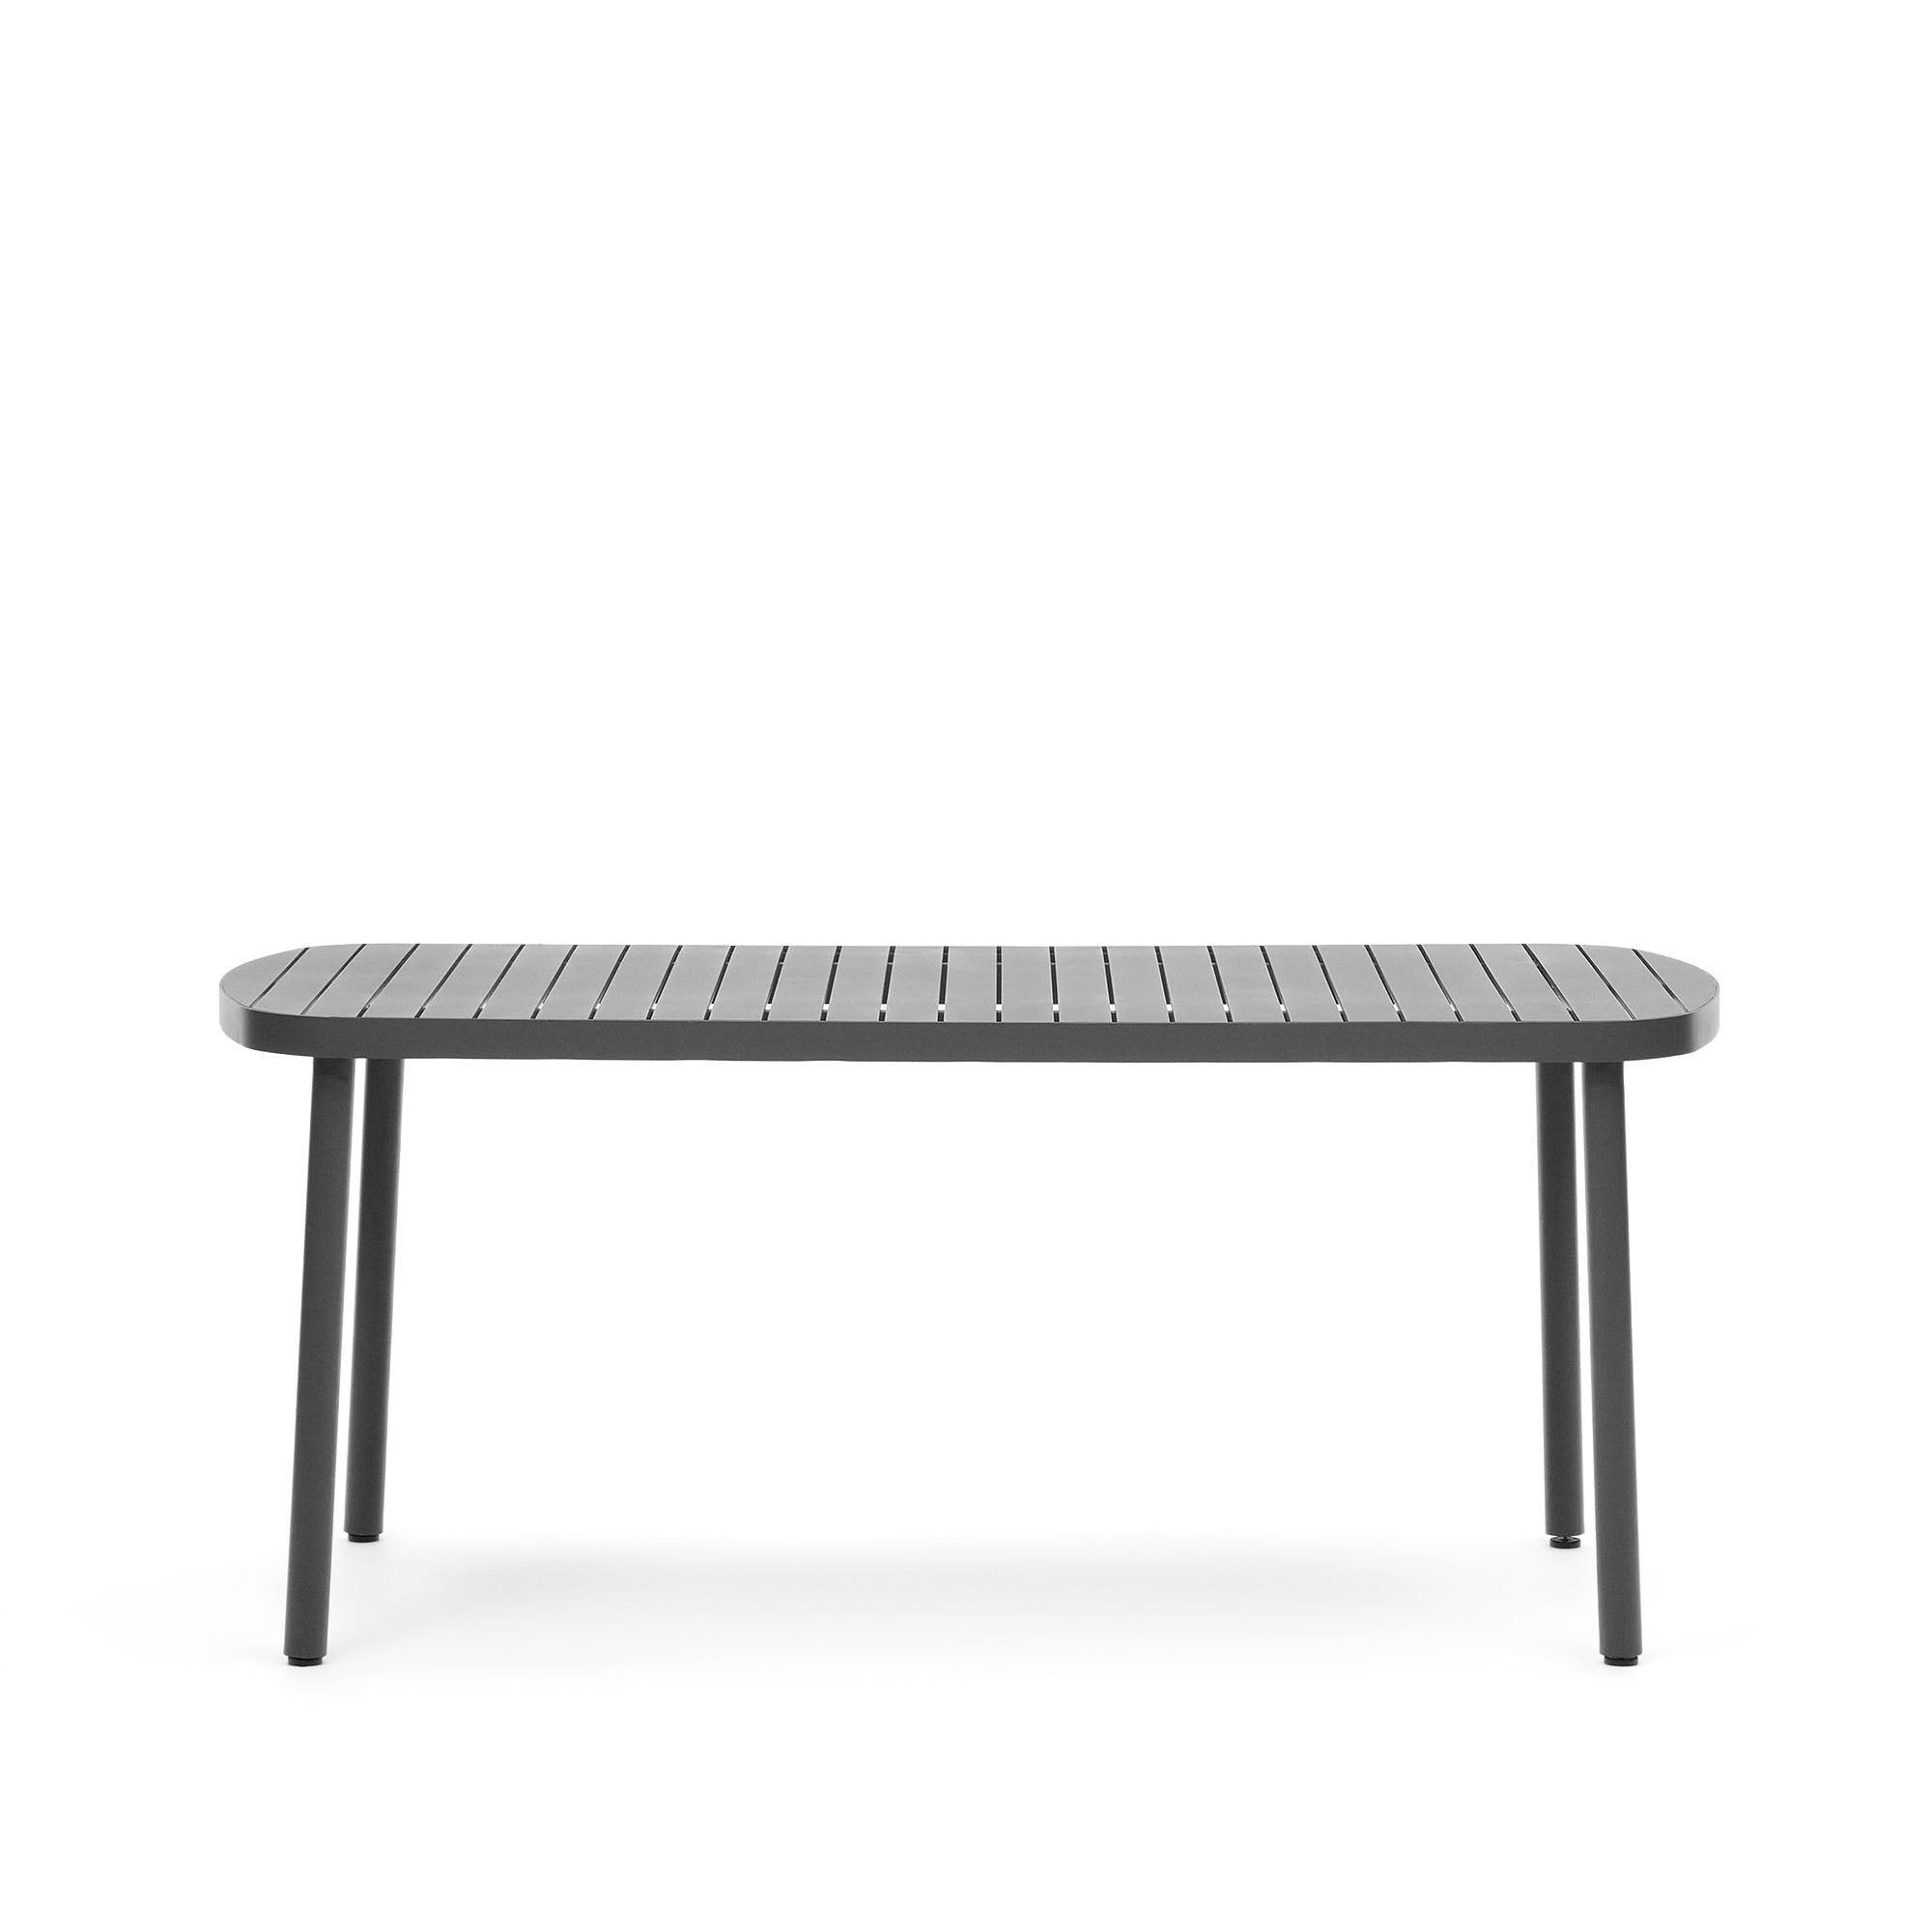 Joncols outdoor aluminium table with a powder coated grey finish, 180 x 90 cm